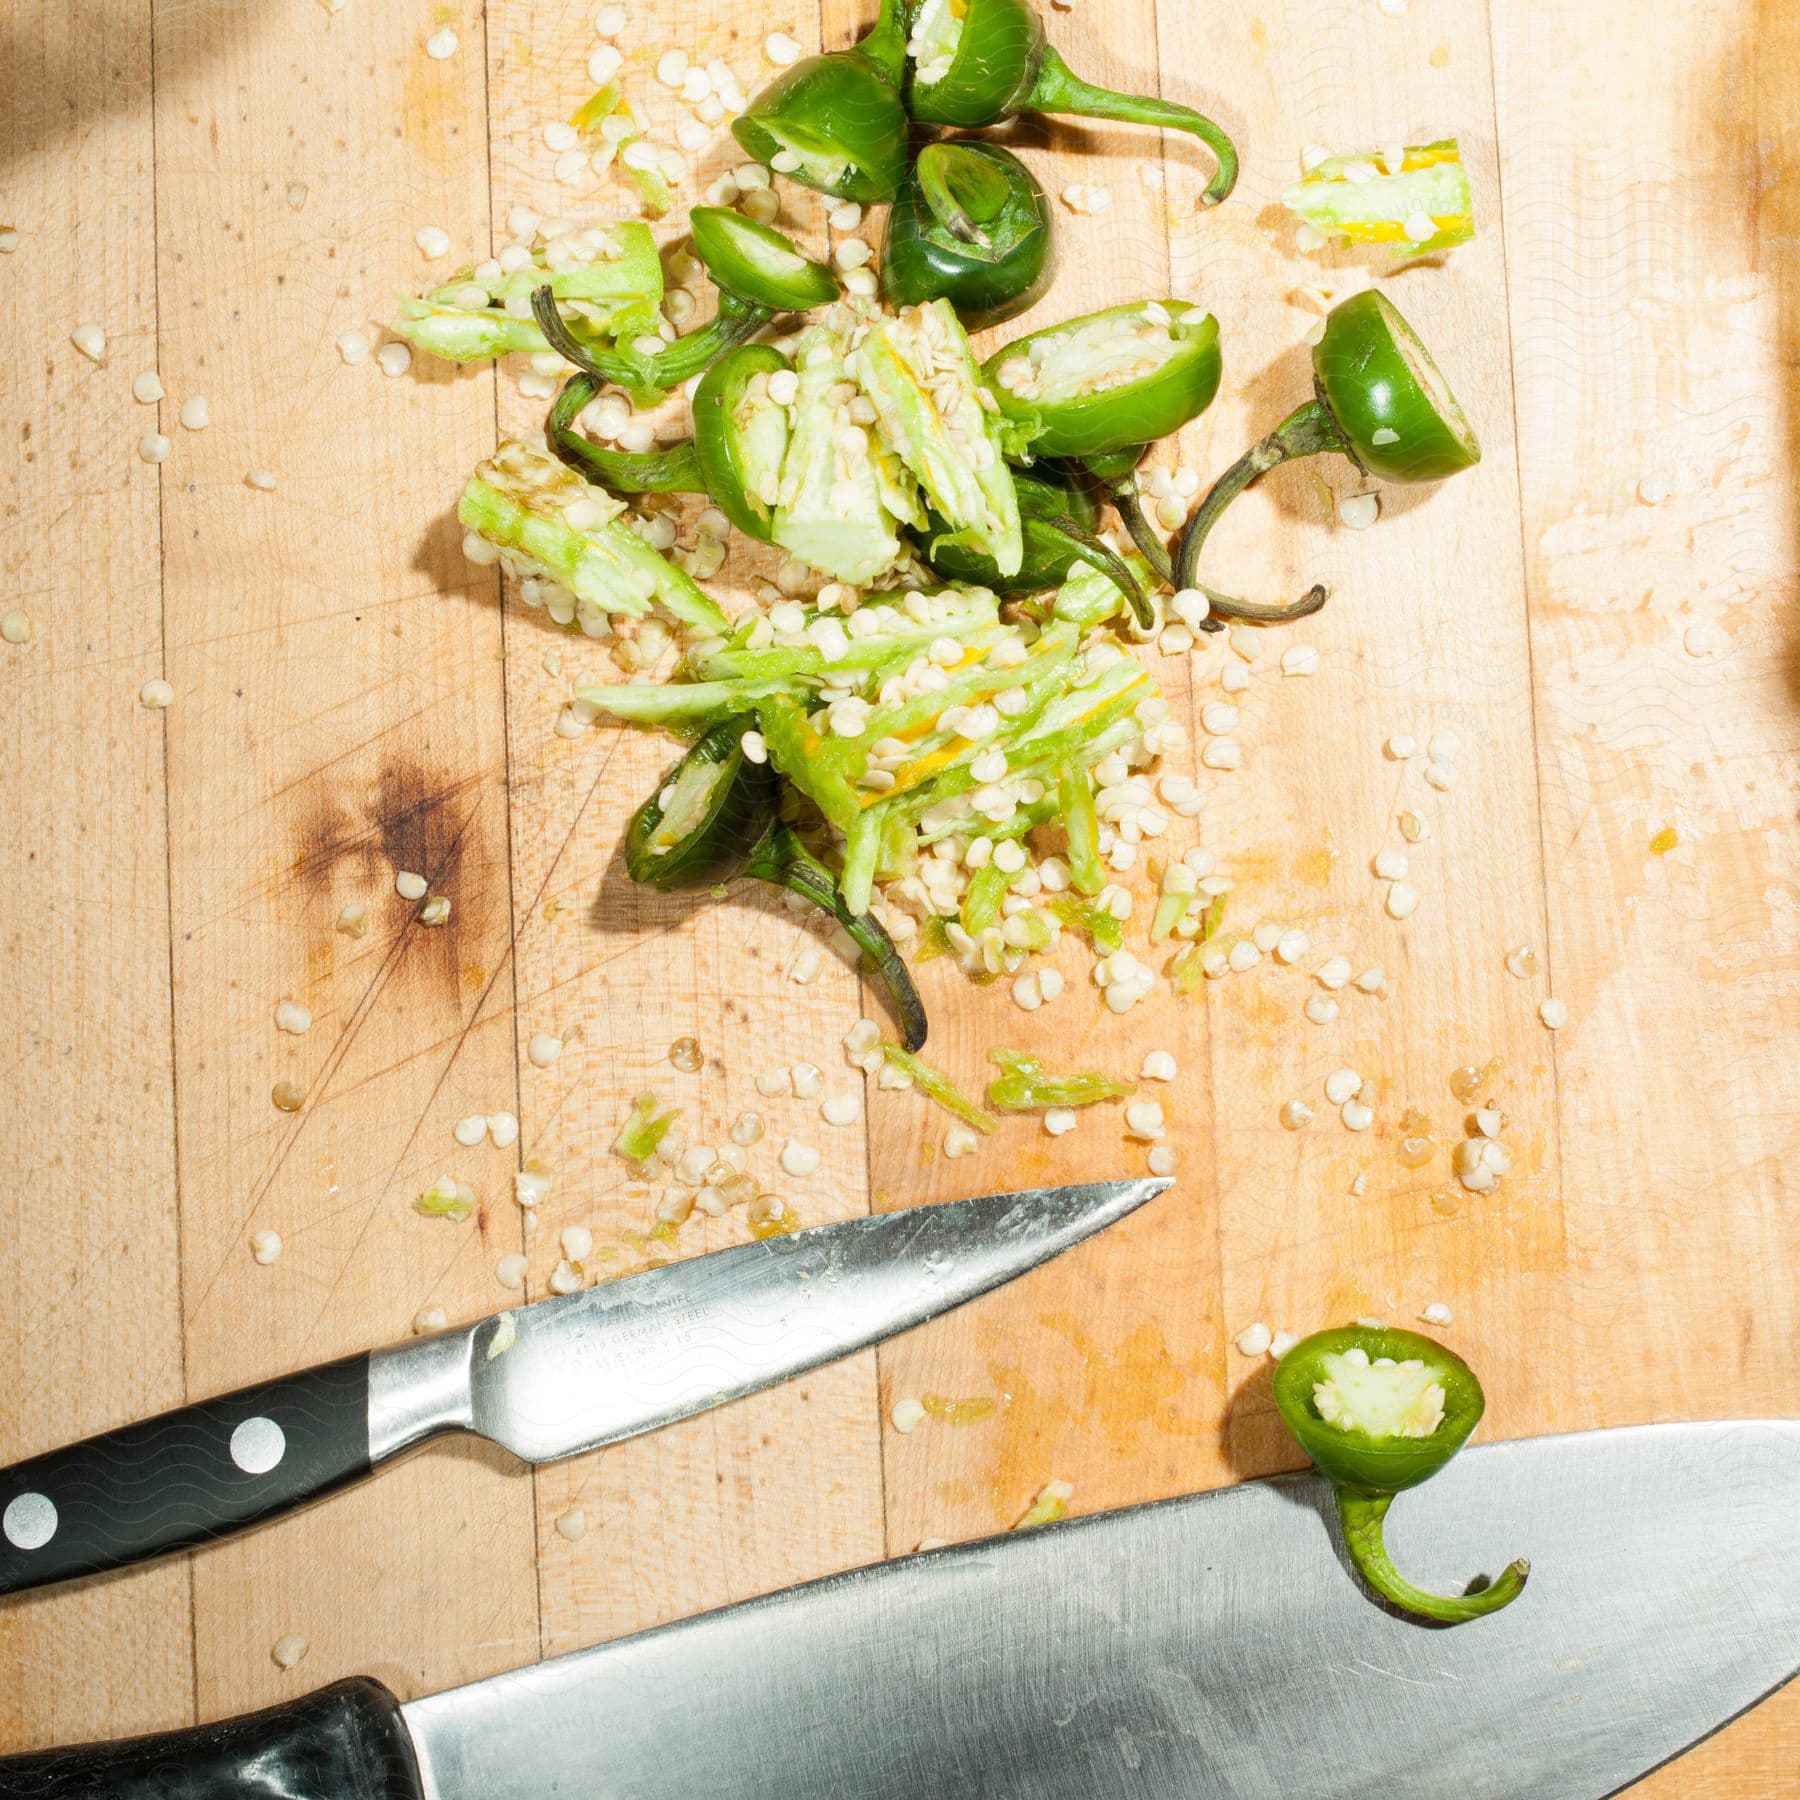 Stock photo of a bunch of sliced jalapeno peppers on a table with a couple of knives next to it